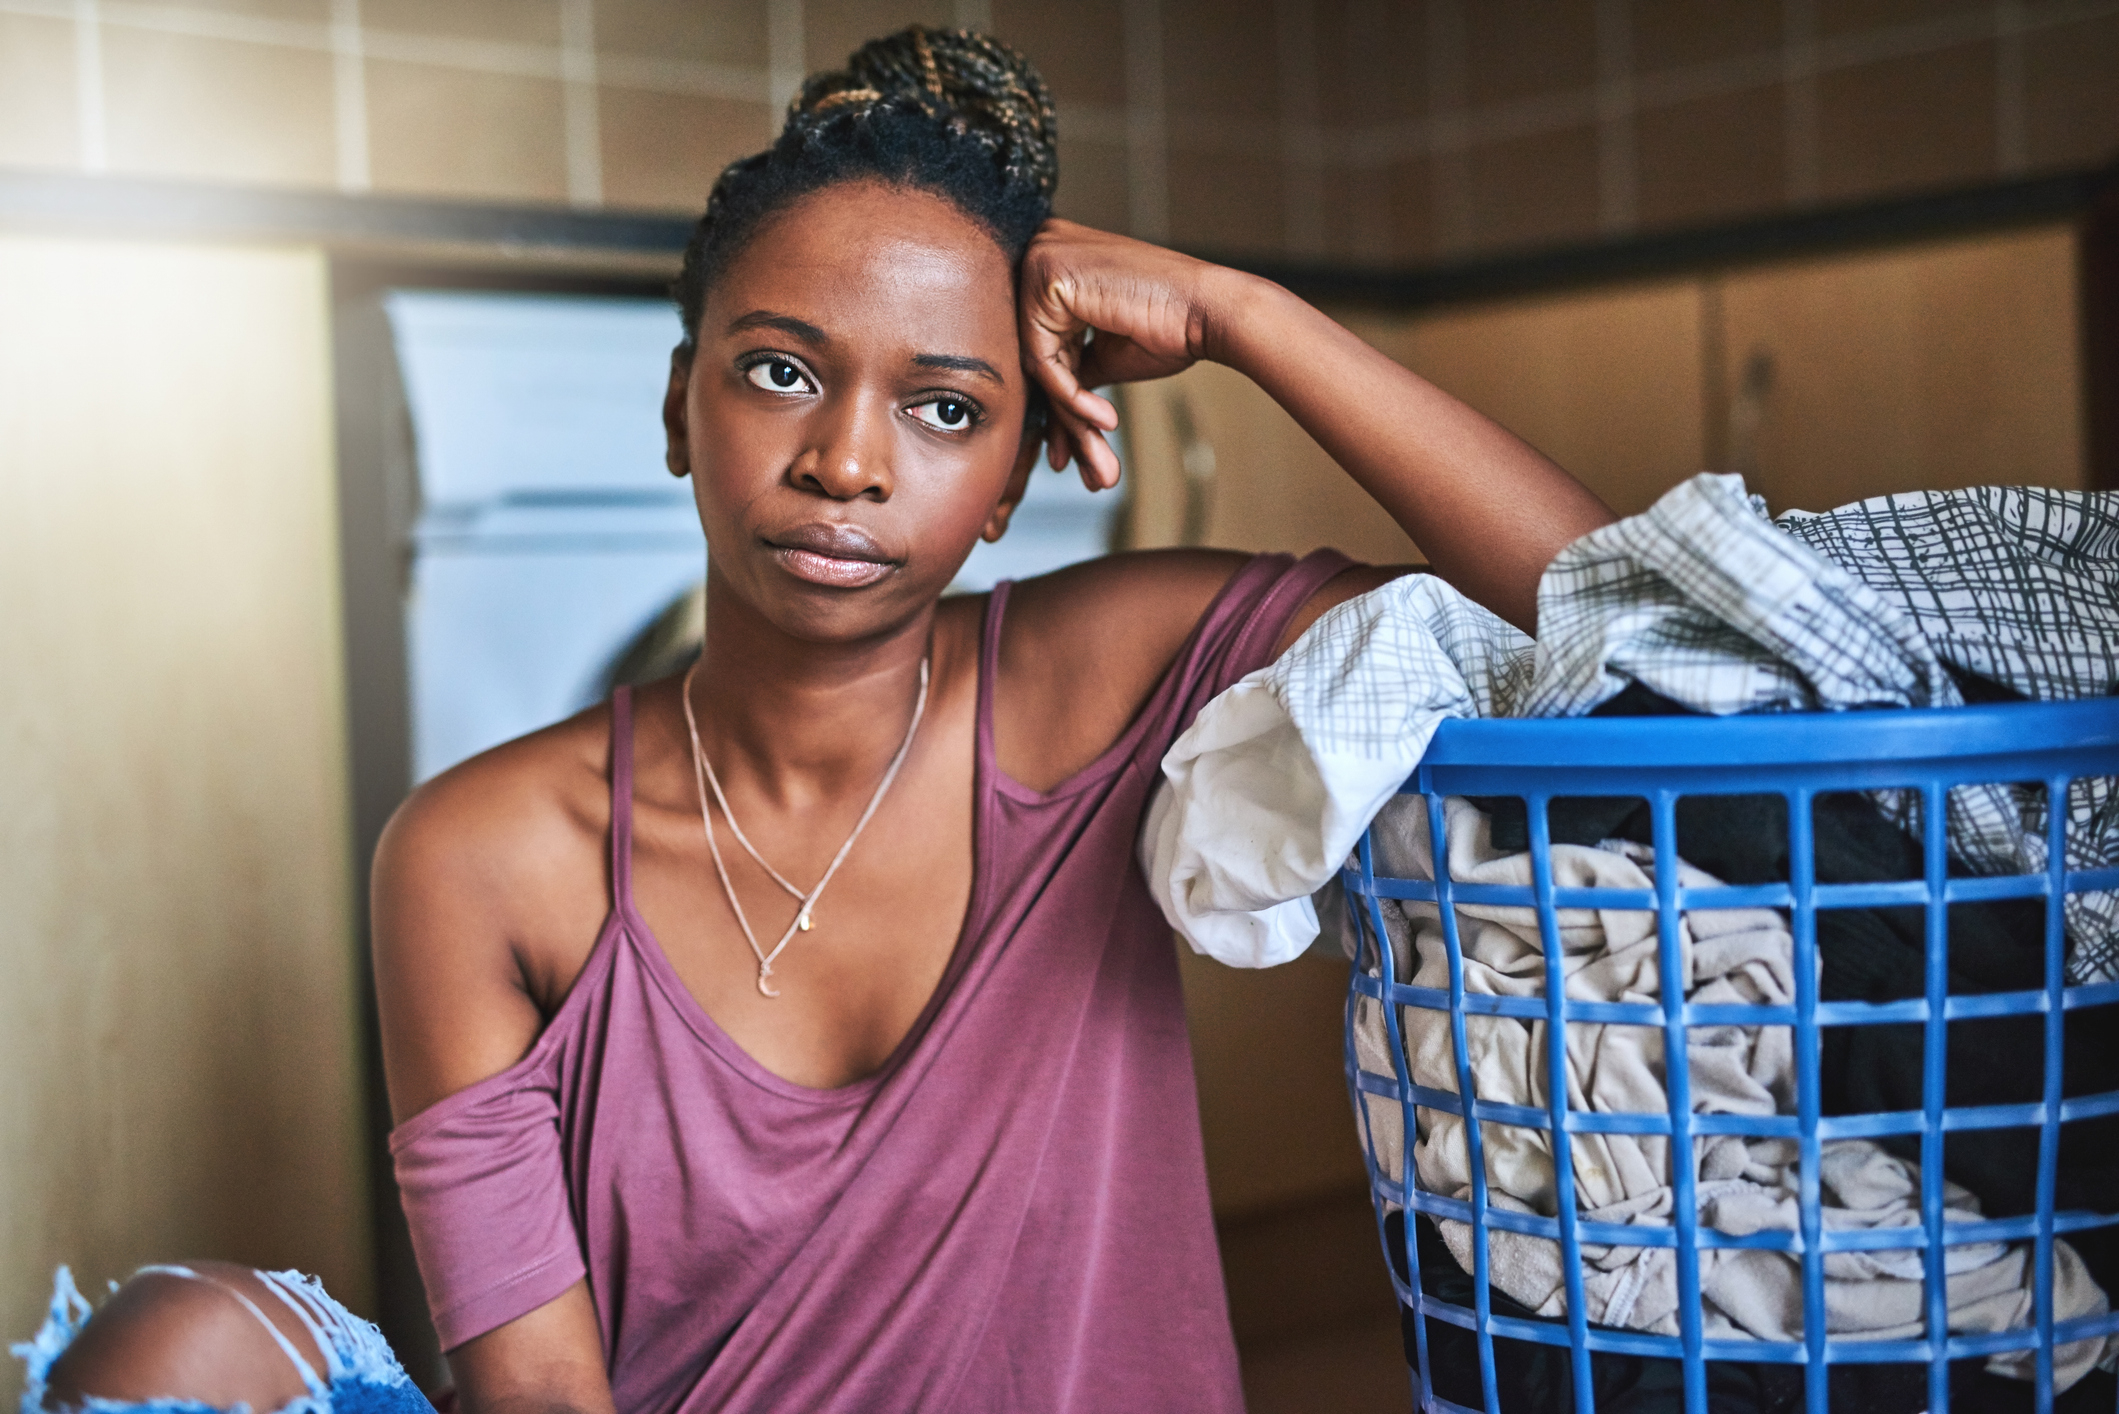 Woman looking tired standing next to a laundry basket, possibly reflecting on relationship dynamics